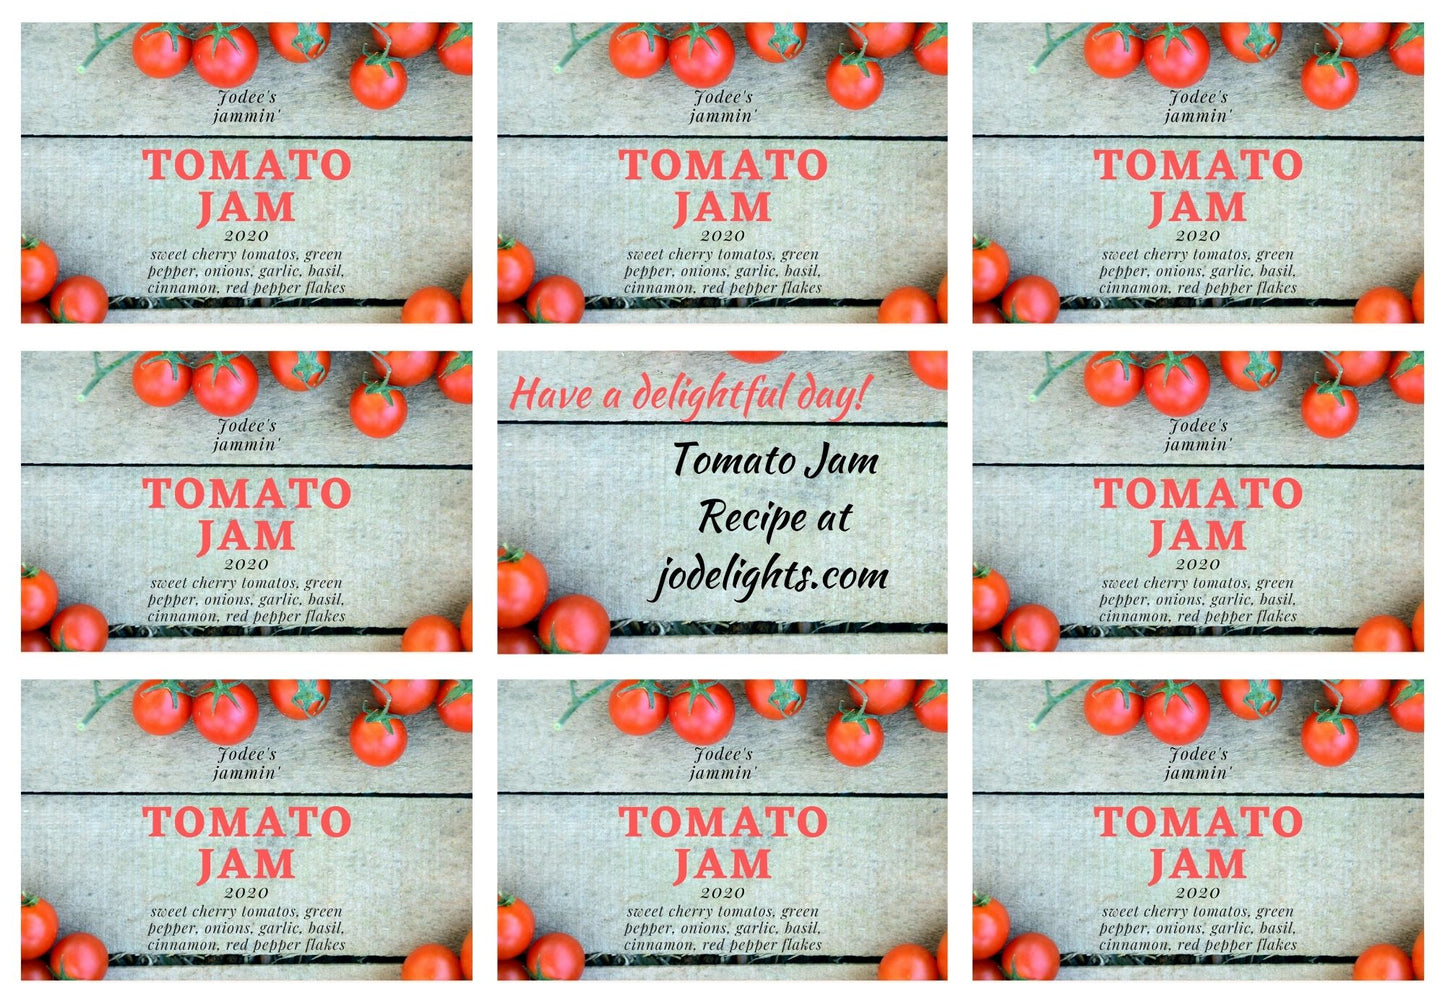 Tomato Jam Printable Canning Labels